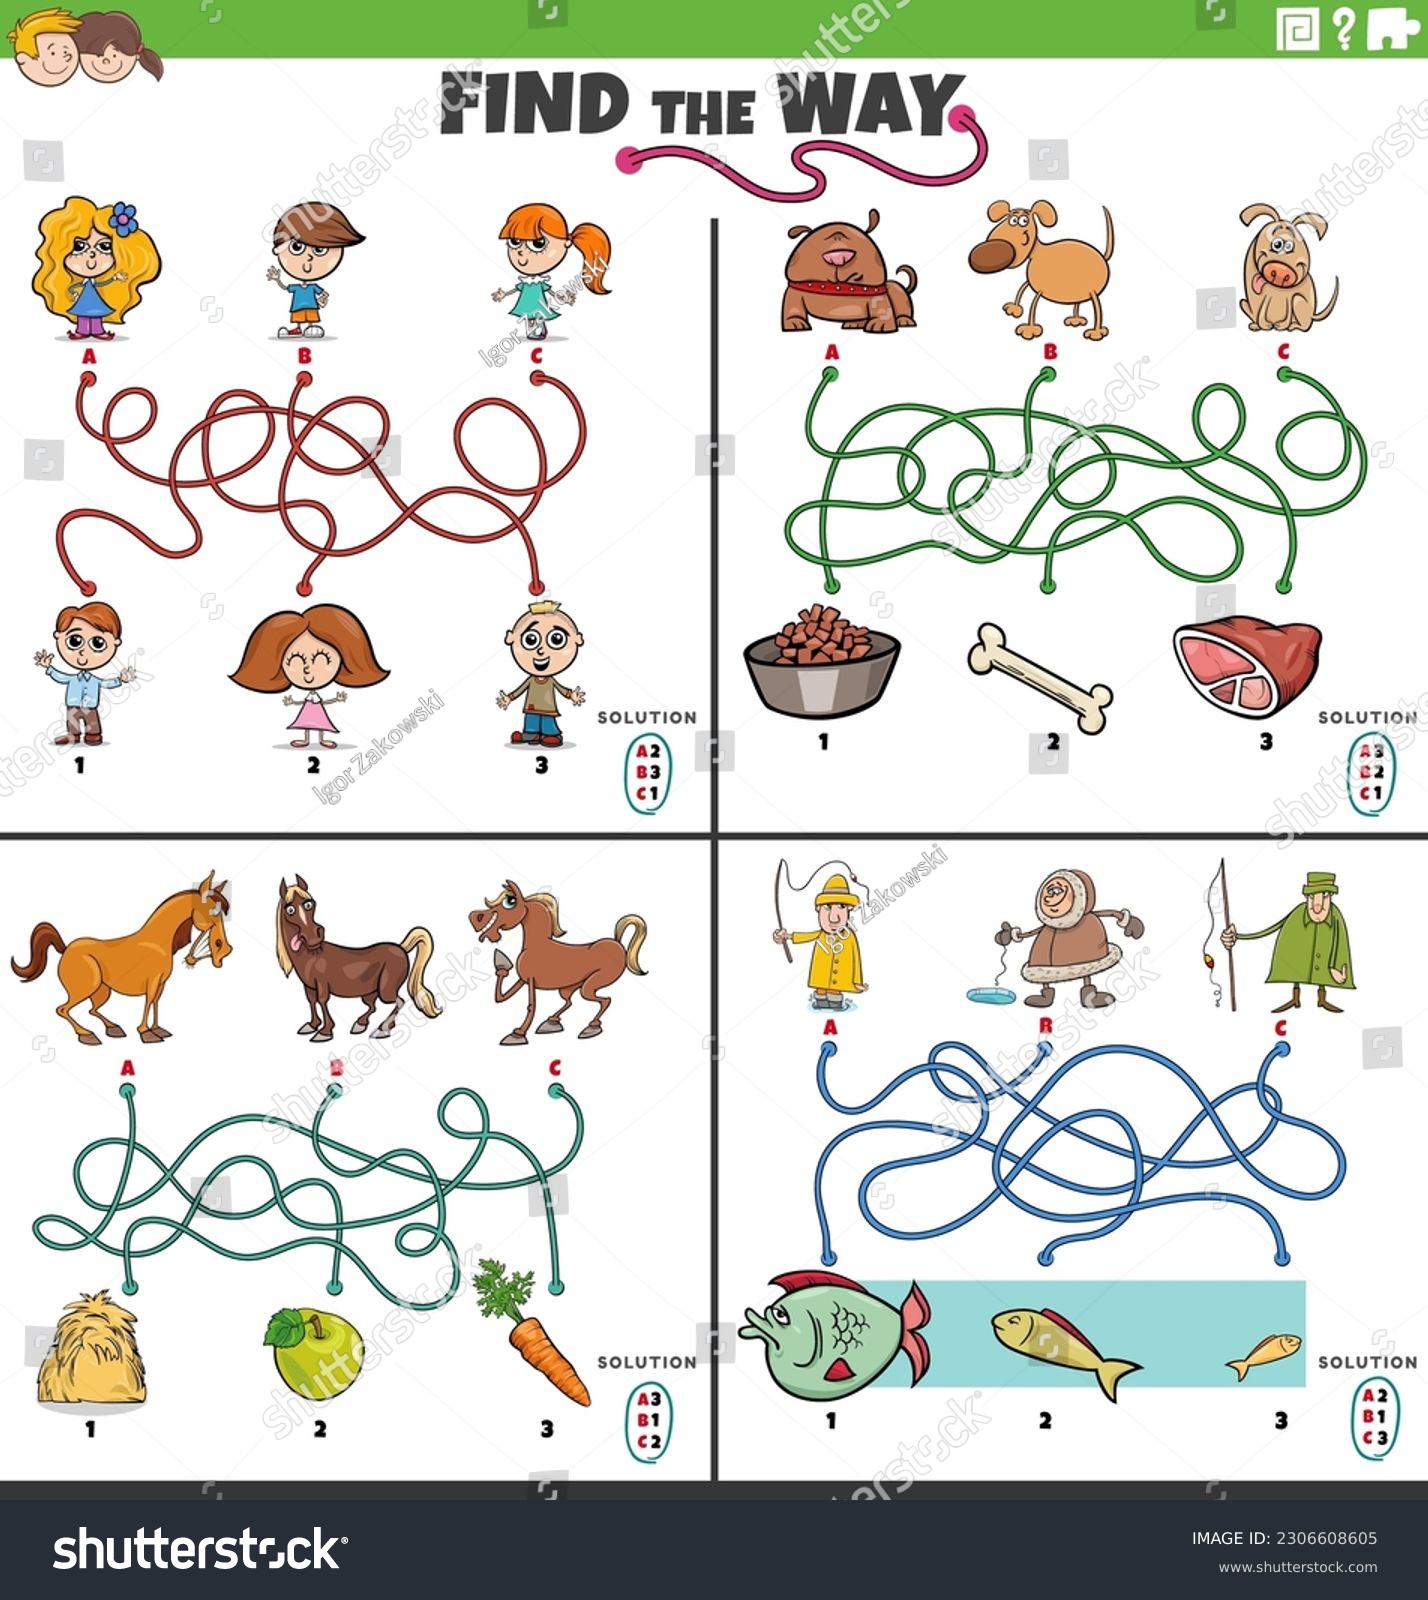 SVG of Cartoon illustration of find the way maze puzzle games set with comic characters svg